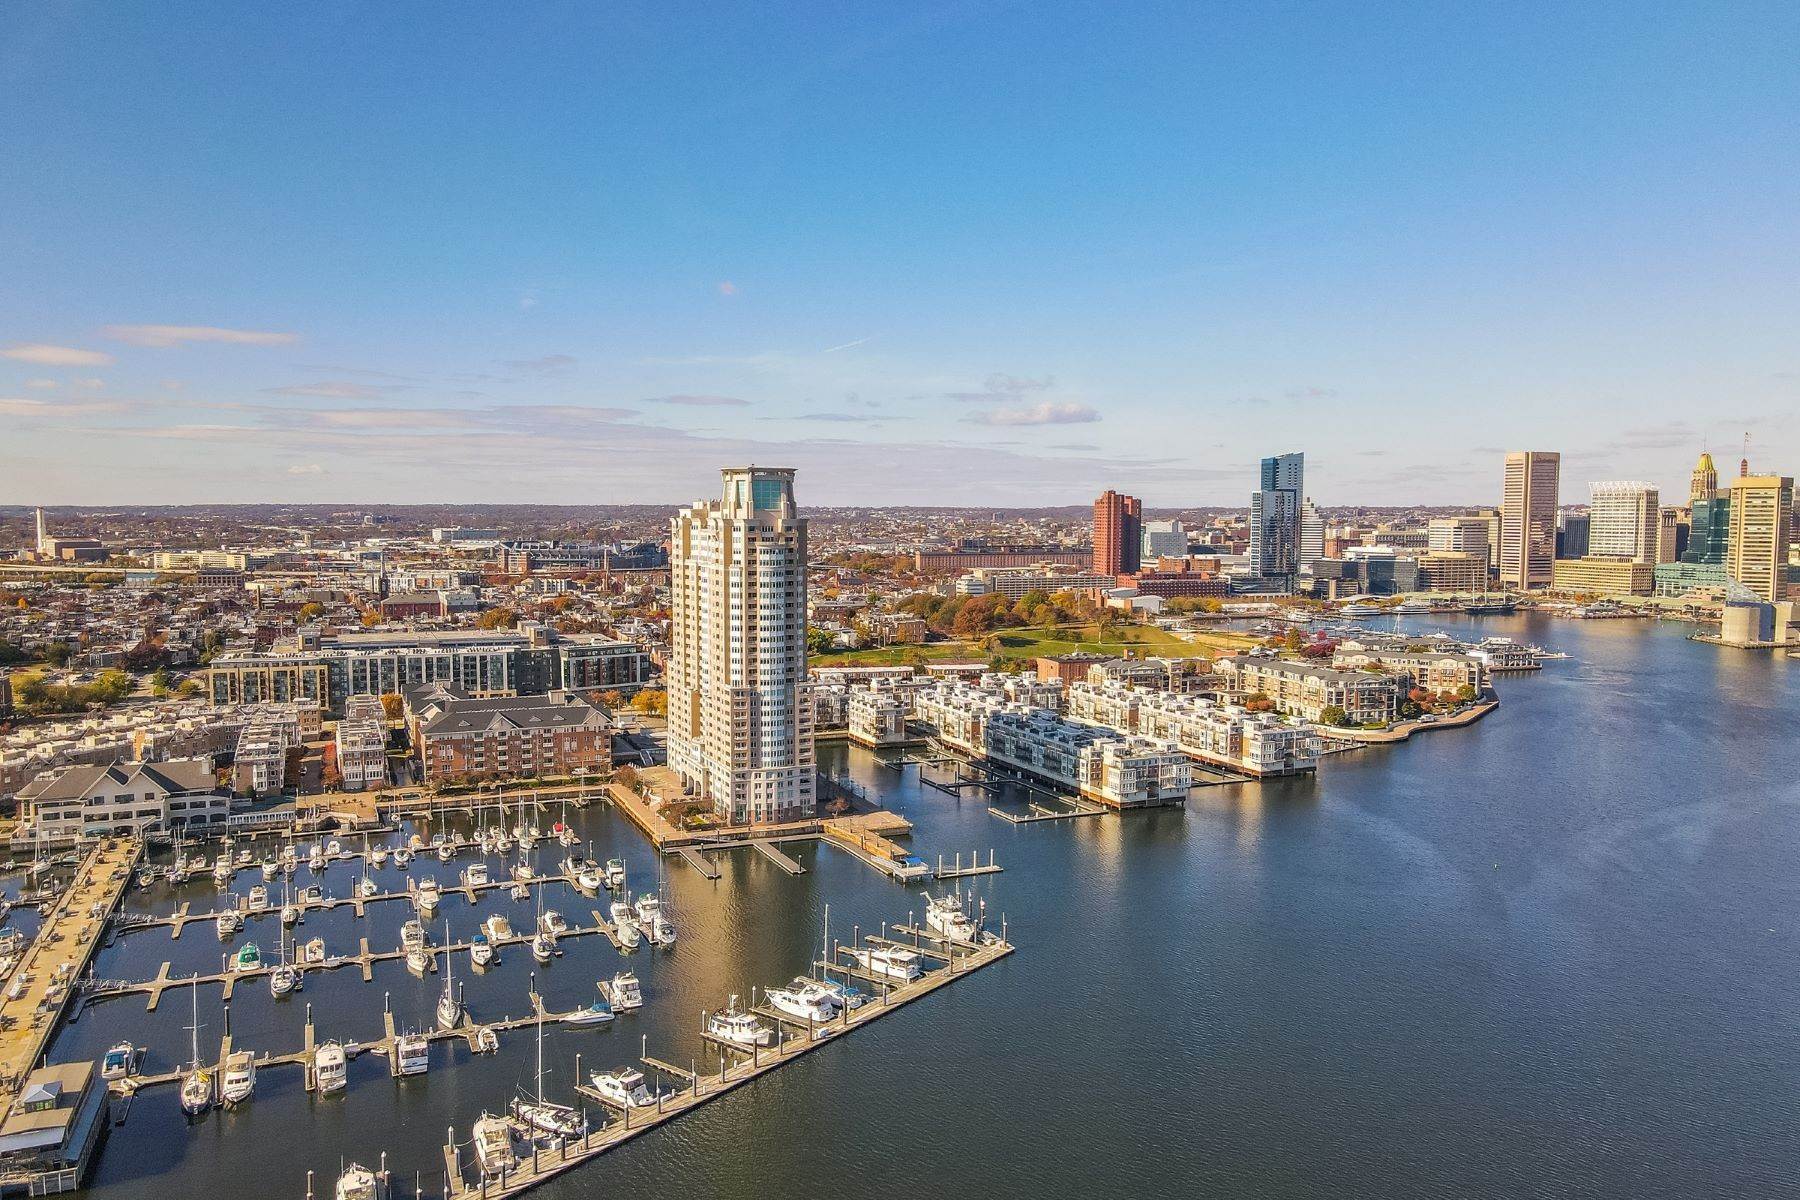 5. Townhouse at The Townes at Harborview 1239 Harbor Island Walk Baltimore, Maryland 21230 United States